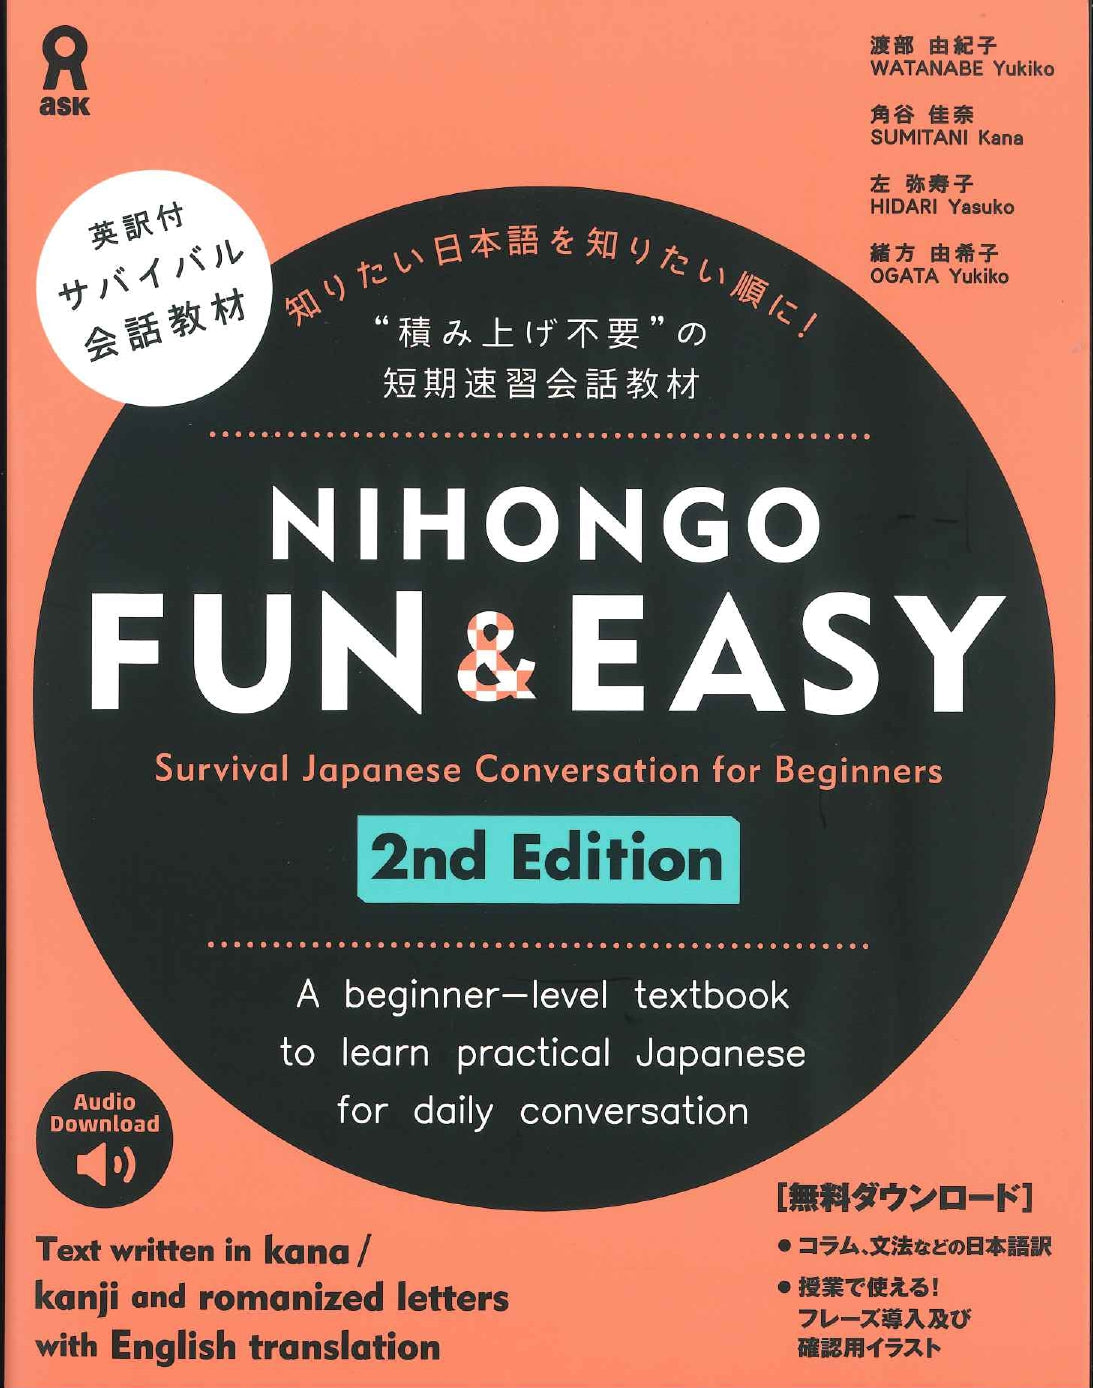 Japanese for Beginners: Learning Conversational Japanese - Second Edition  (Includes Online Audio) See more